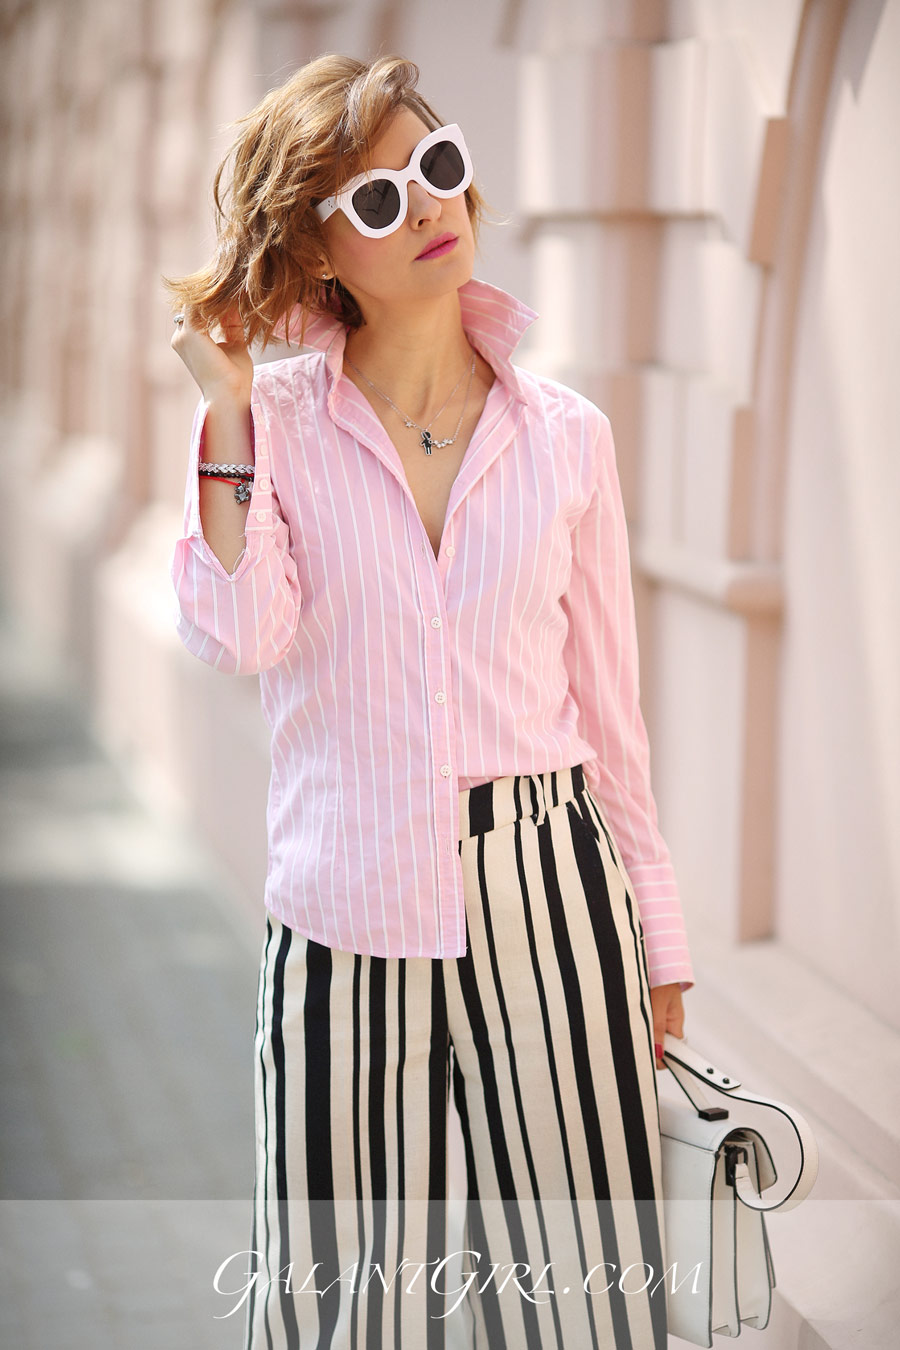 MIXING STRIPES OUTFITS, mixing striped patterns, 